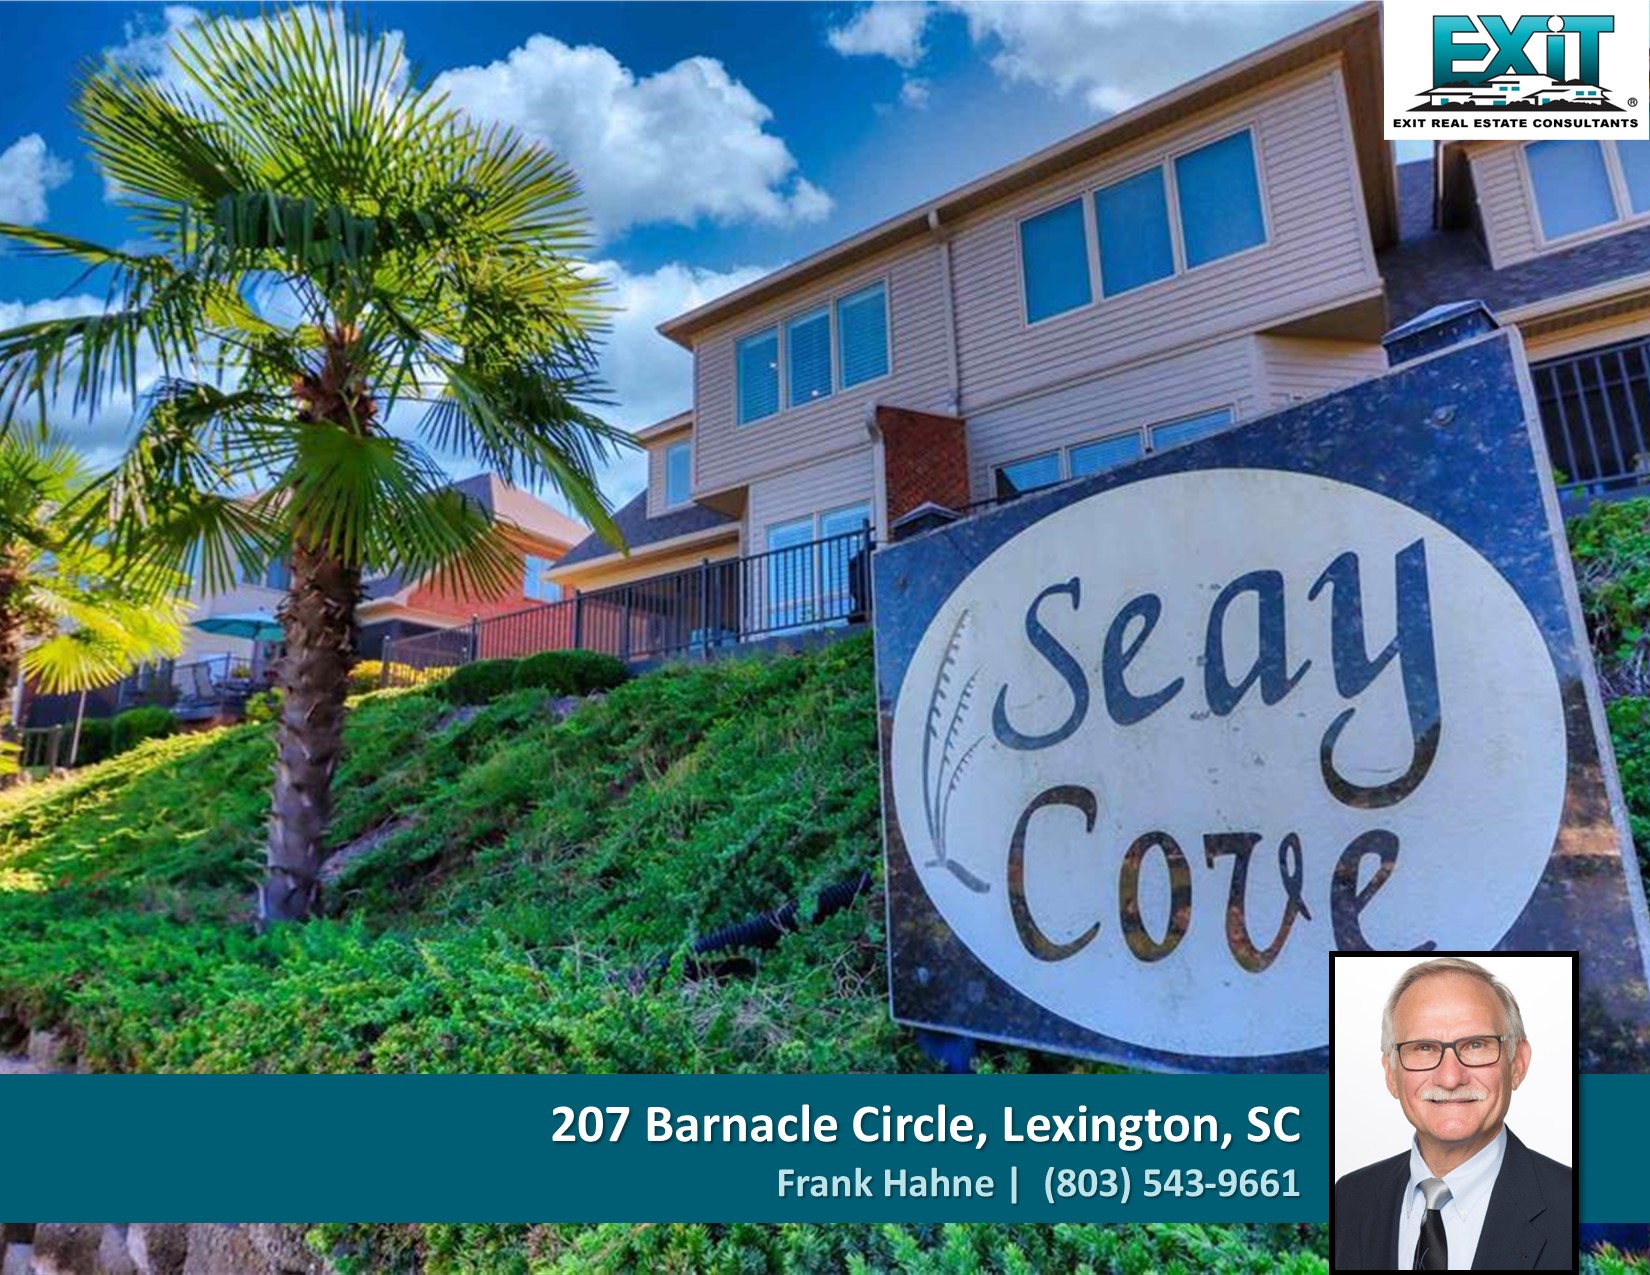 Just listed in Seay Cove